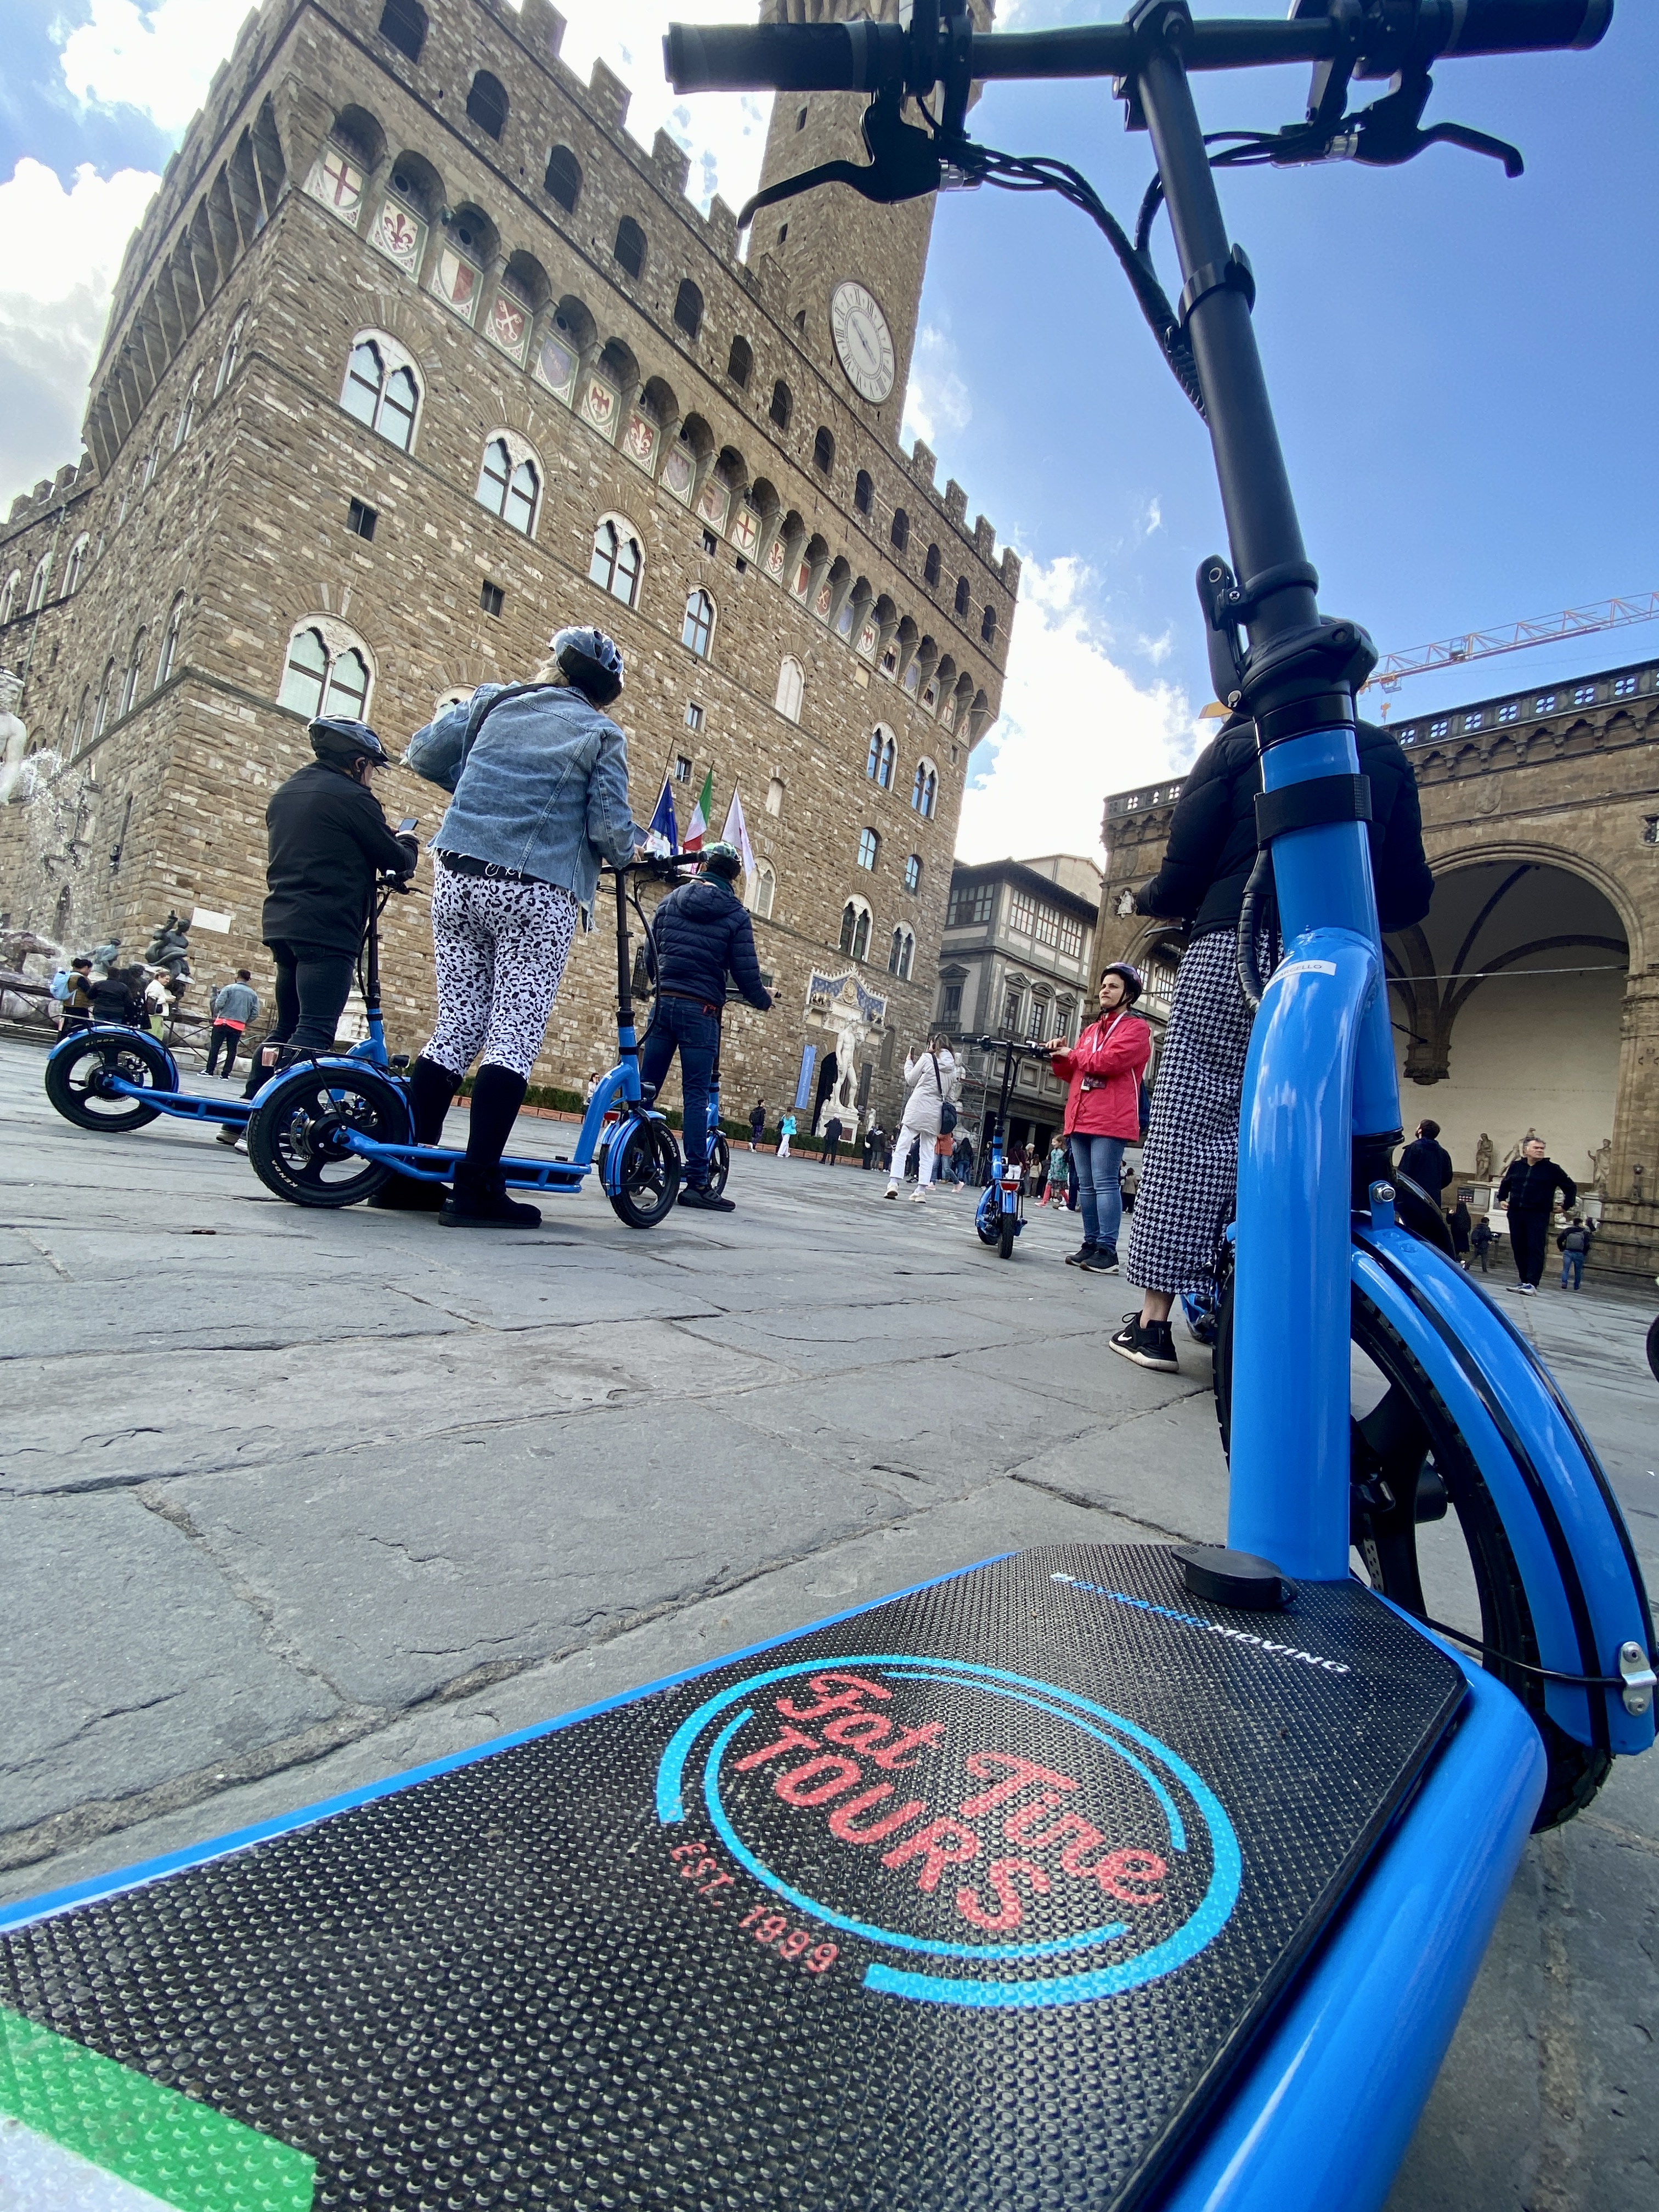 A group of e-scooter riders learn about the Piazza Signoria in Florence, Italy